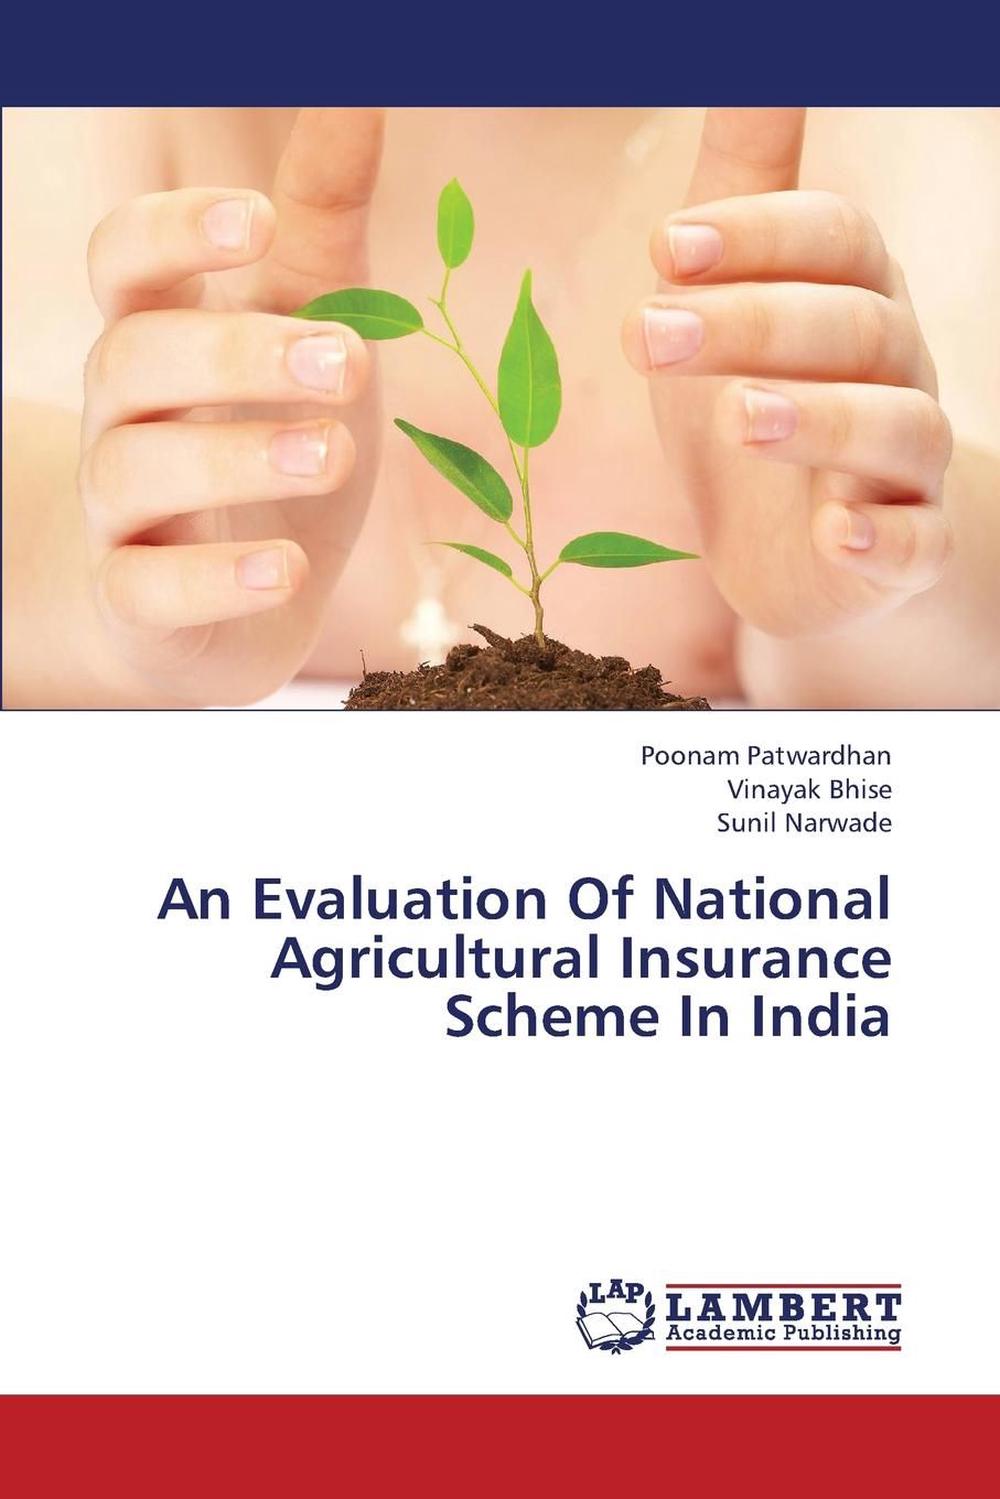 research paper on agriculture insurance in india